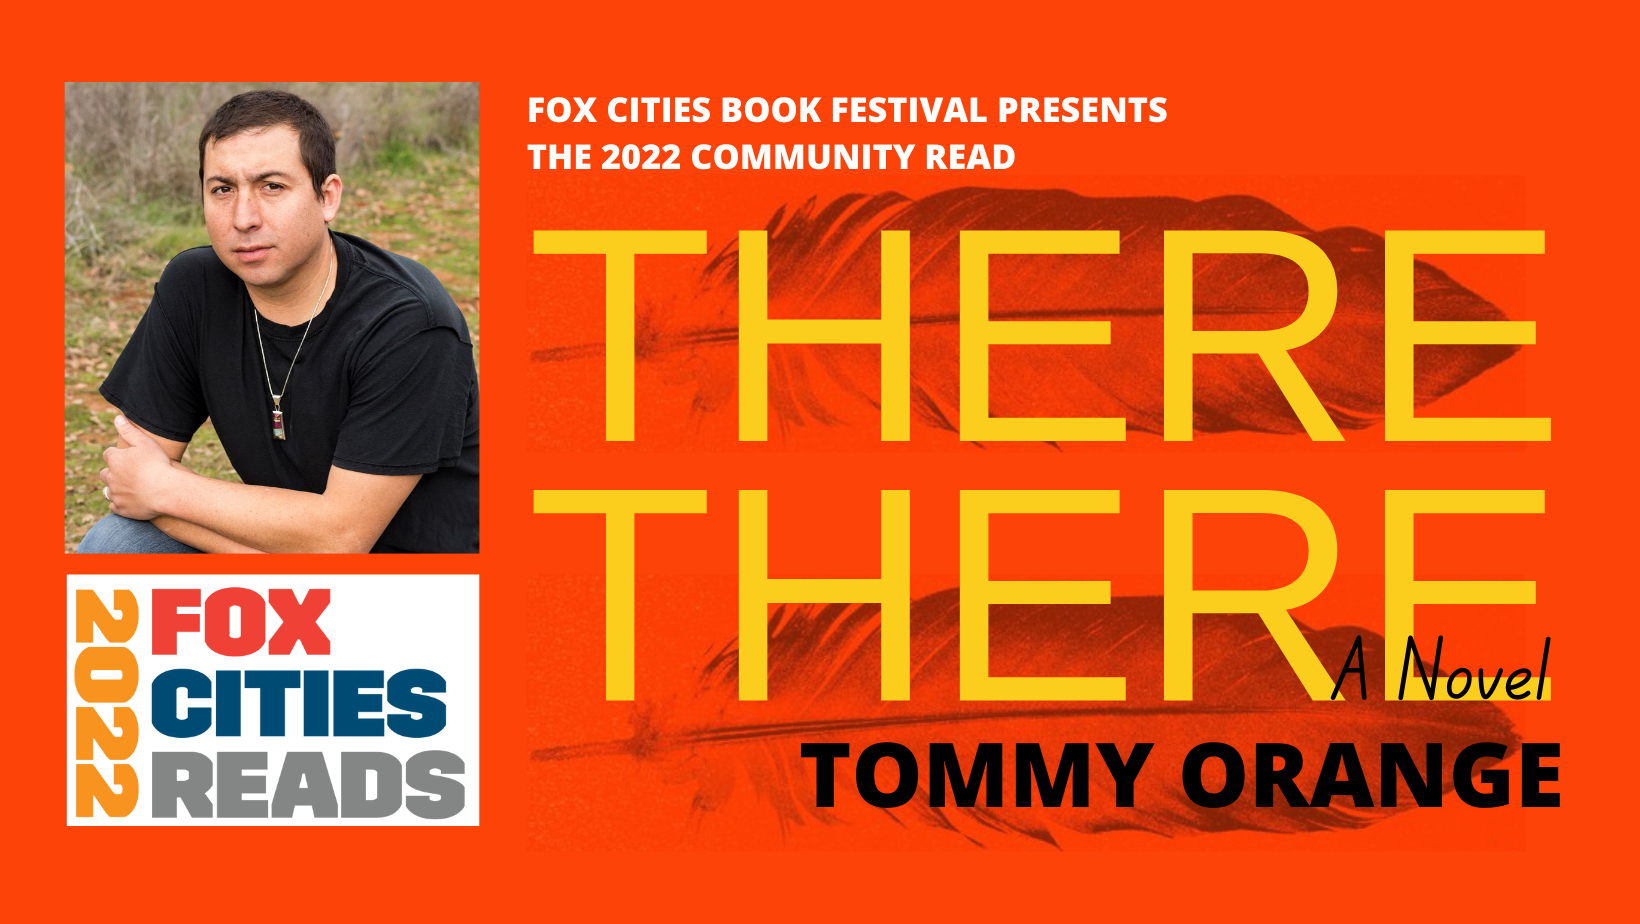 Author, Tommy Orange and the cover of his novel, 